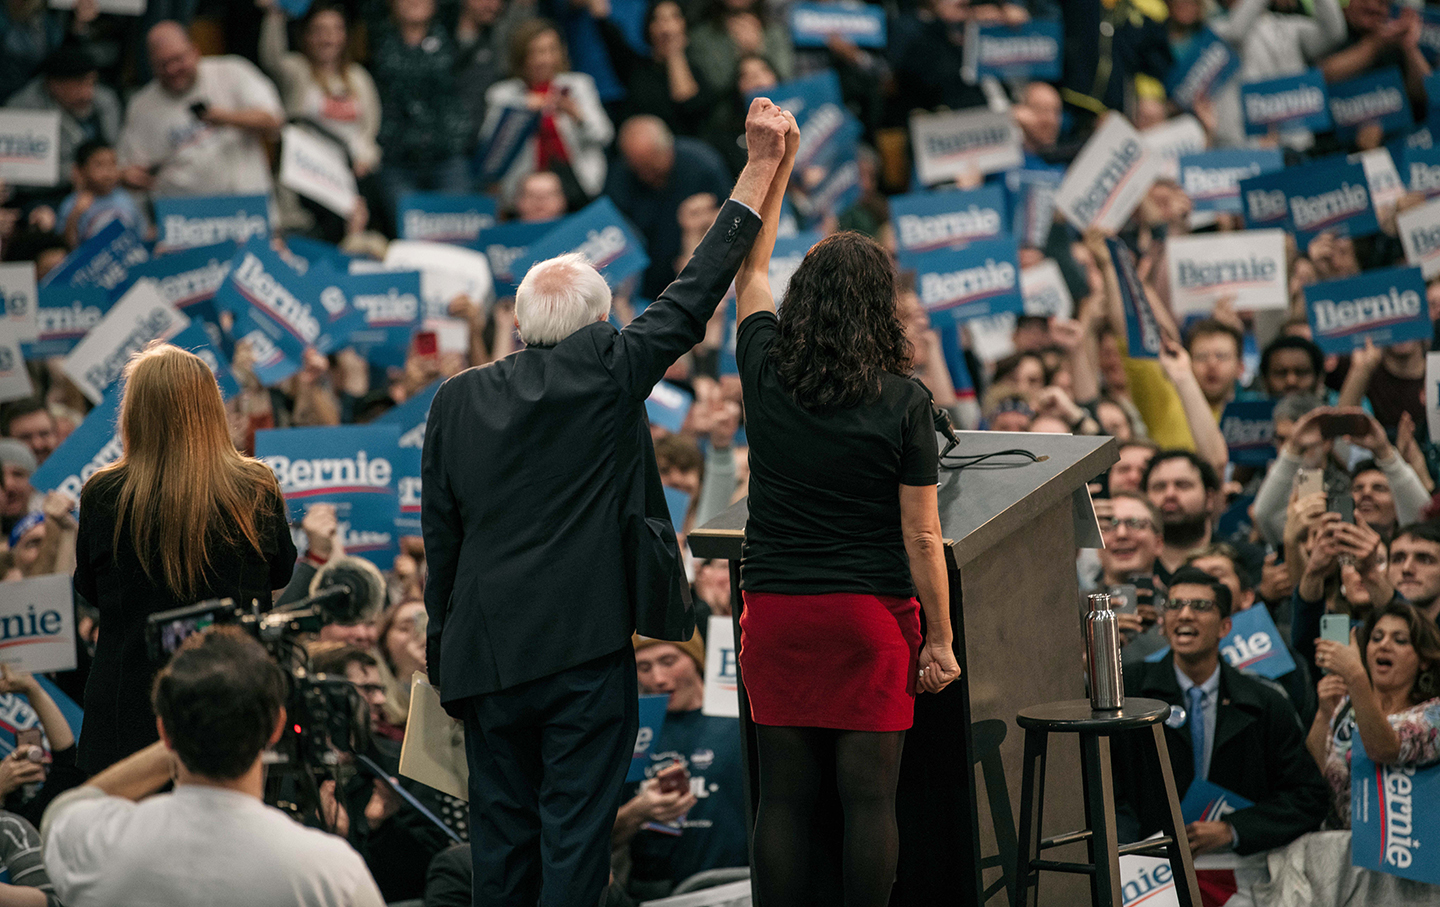 Bernie Sanders Holds Campaign Rally In Detroit With Rep. Rashida Tlaib